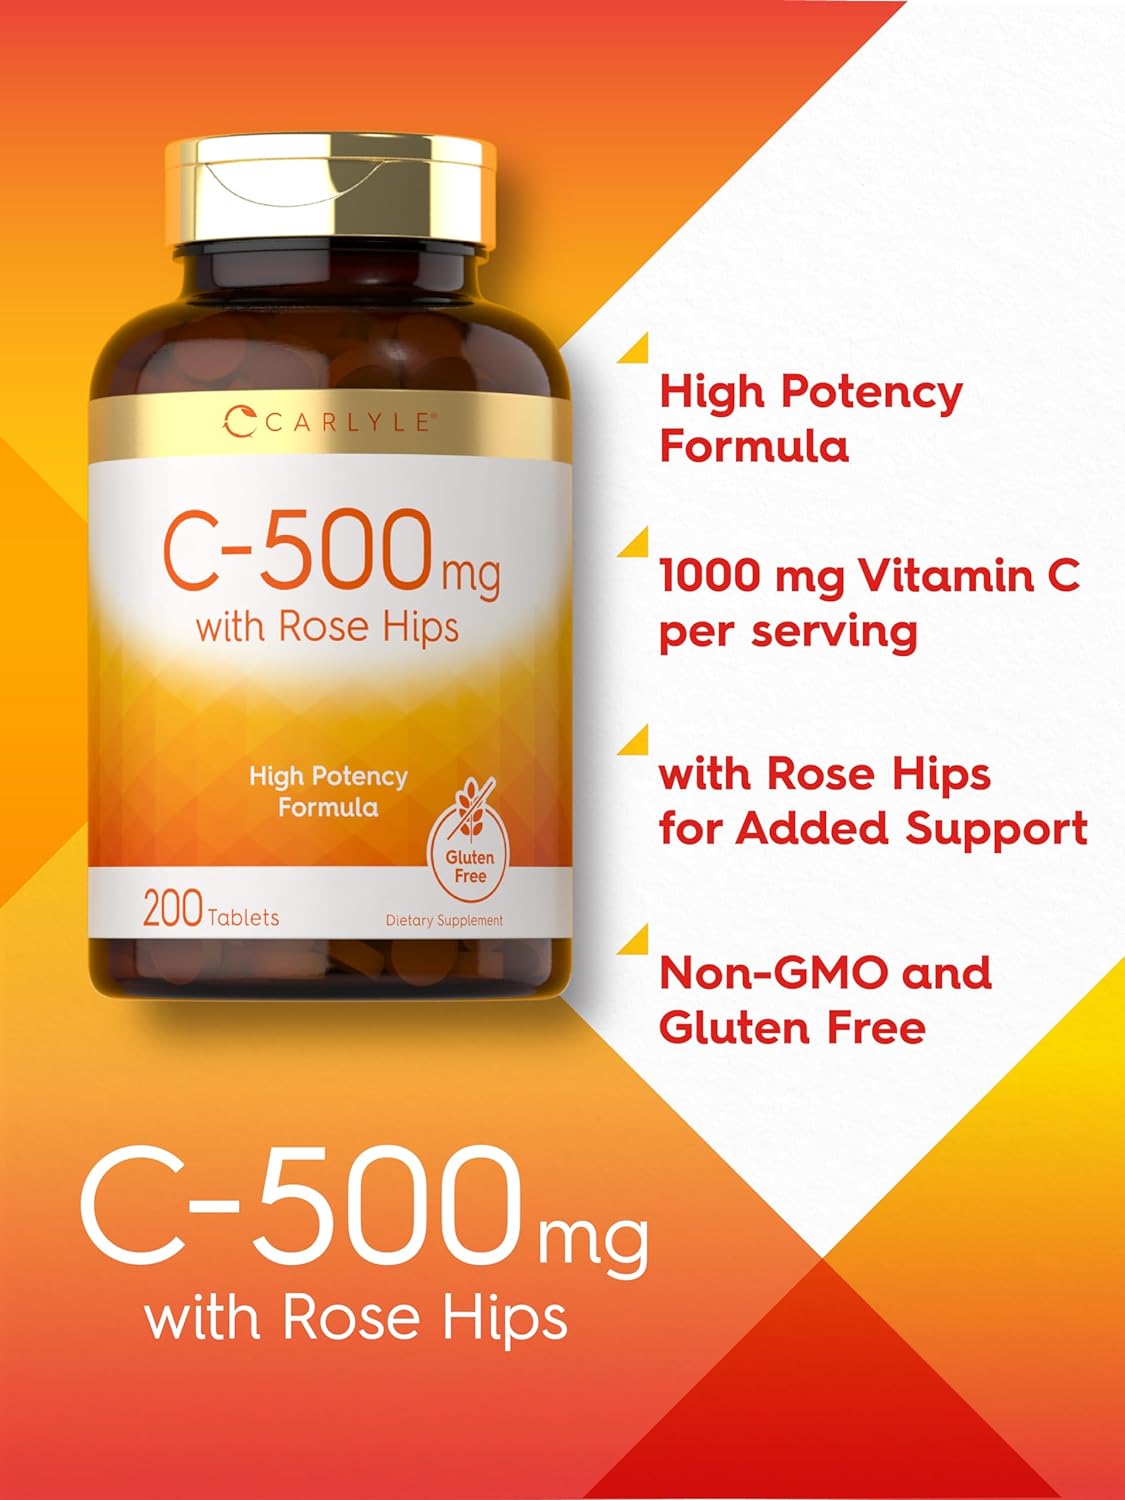 Carlyle Vitamin C with Rose HIPS 500mg | 200 Tablets | High Potency Formula | Vegetarian, Non-GMO and Gluten Free Supplement